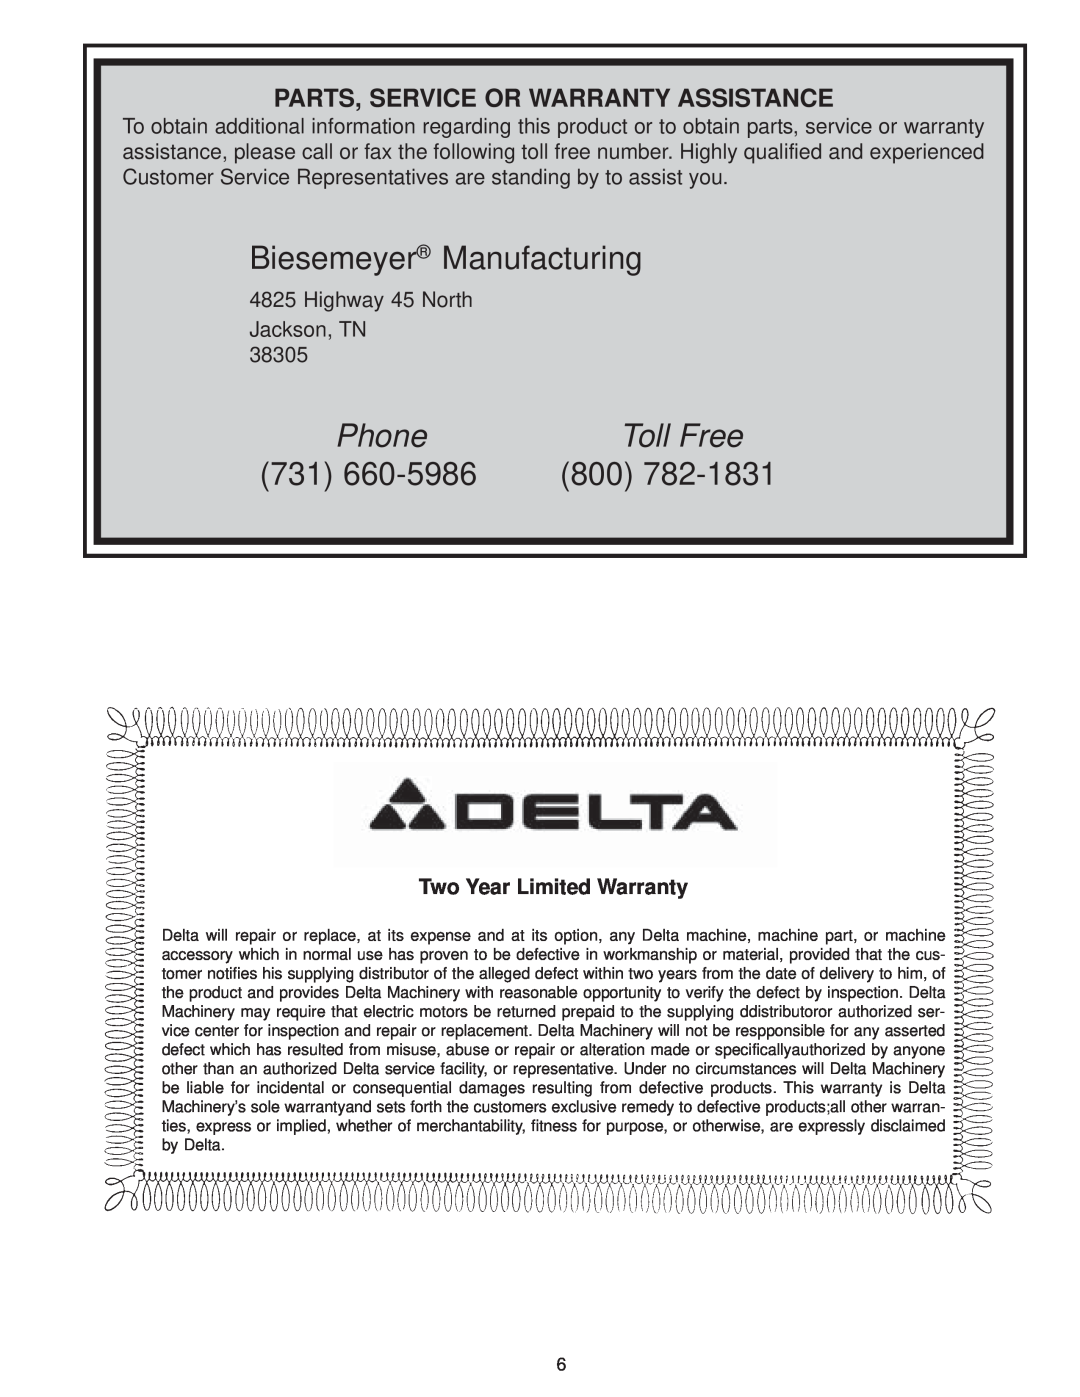 Delta 78-939 manual Biesemeyer Manufacturing, Parts, Service Or Warranty Assistance, Highway 45 North Jackson, TN, Phone 